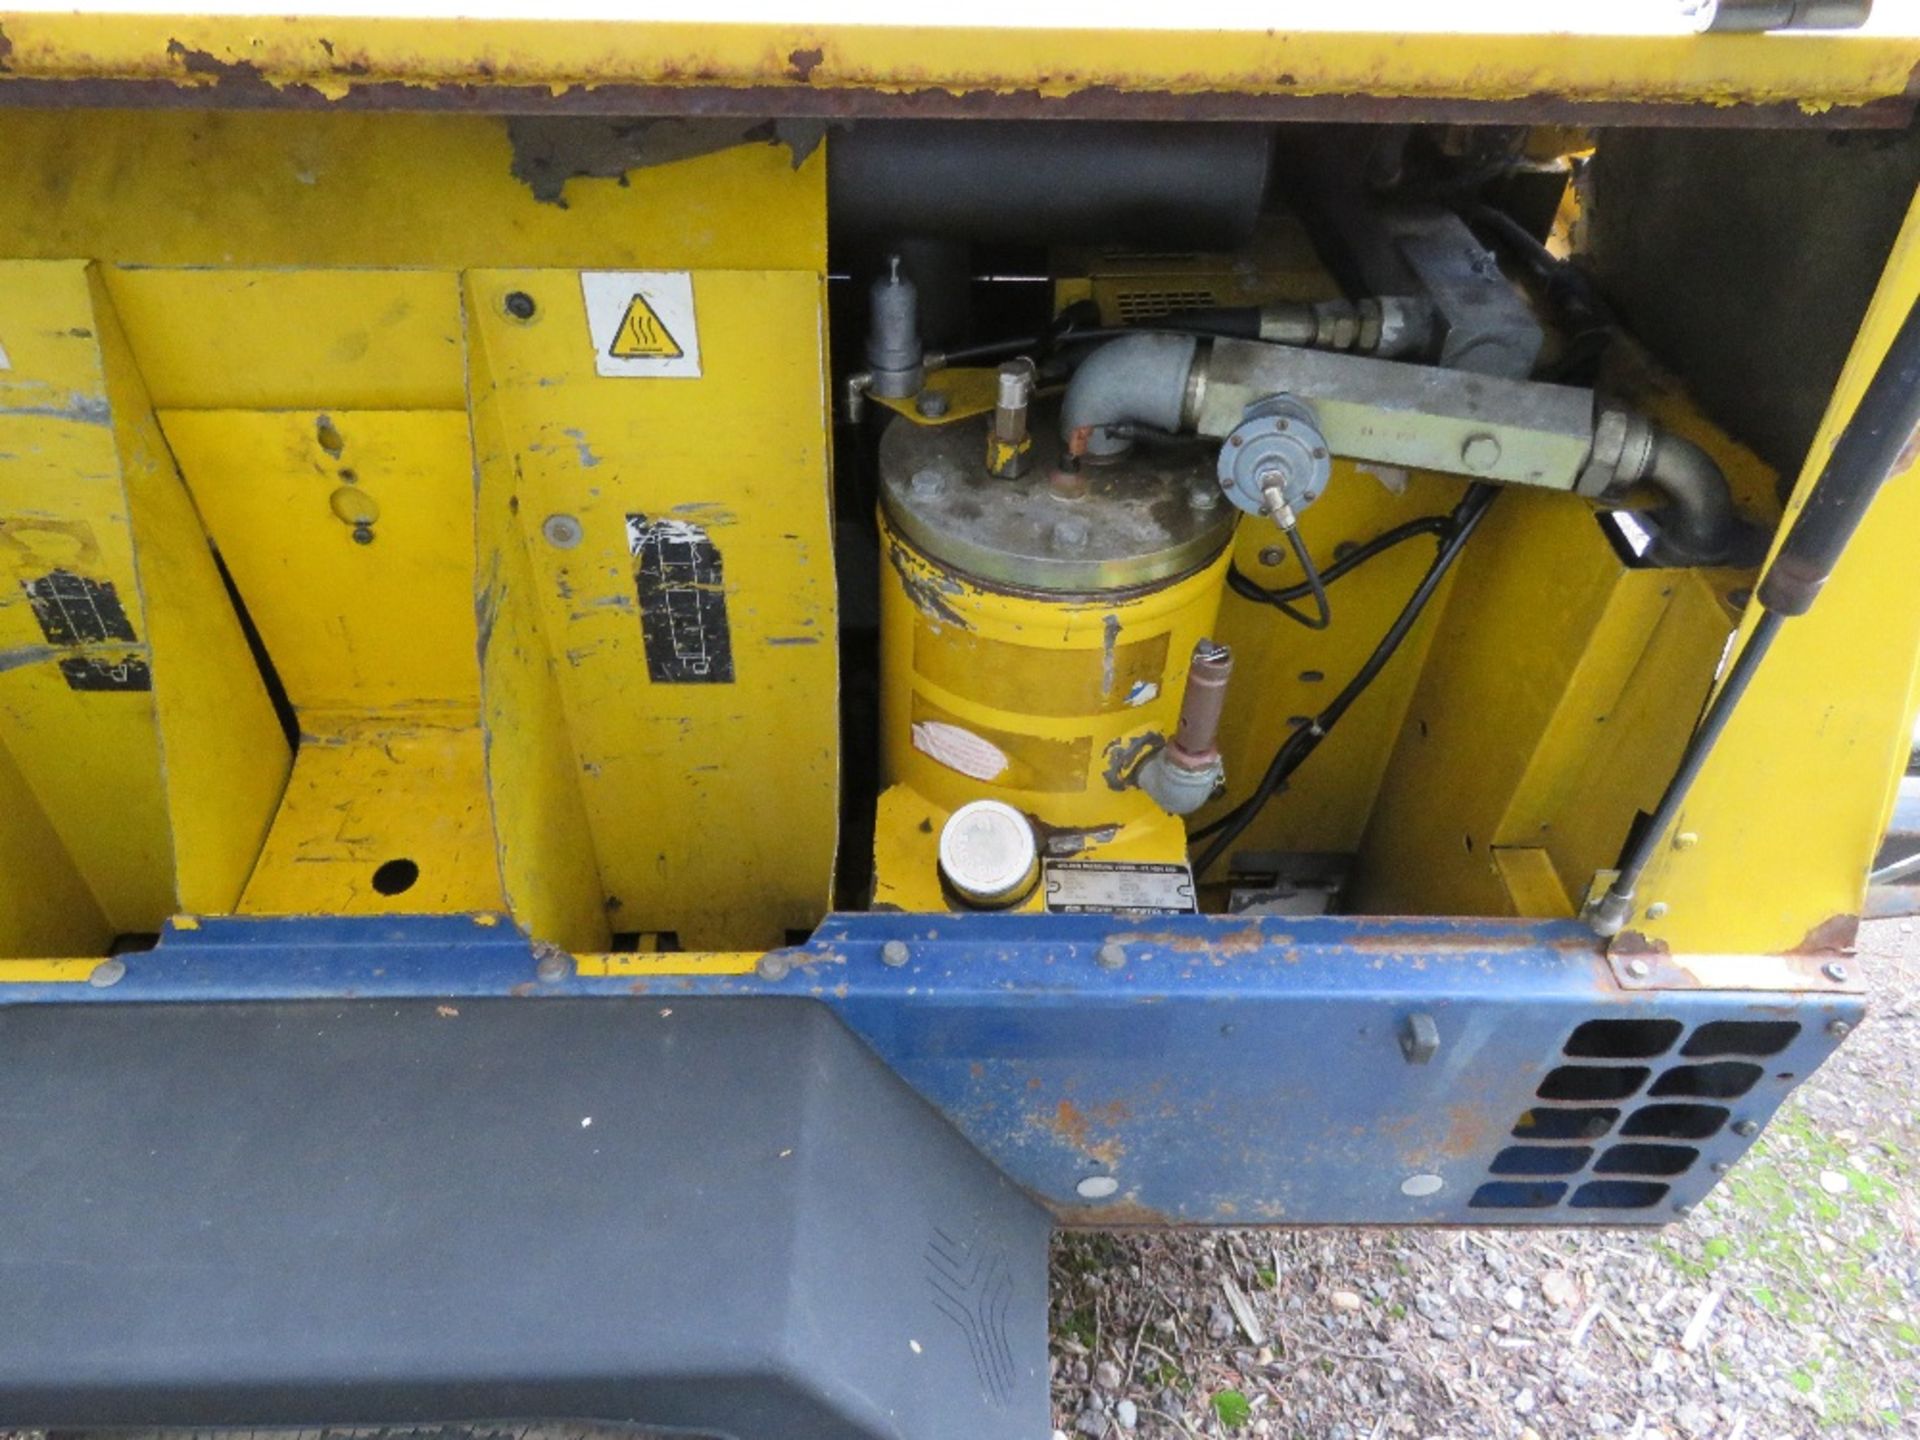 COMPAR C42 TOWED ROAD COMPRESSOR 150 CFM OUTPUT. WHEN TESTED WAS SEEN TO RUN AND MAKE AIR. - Image 7 of 7